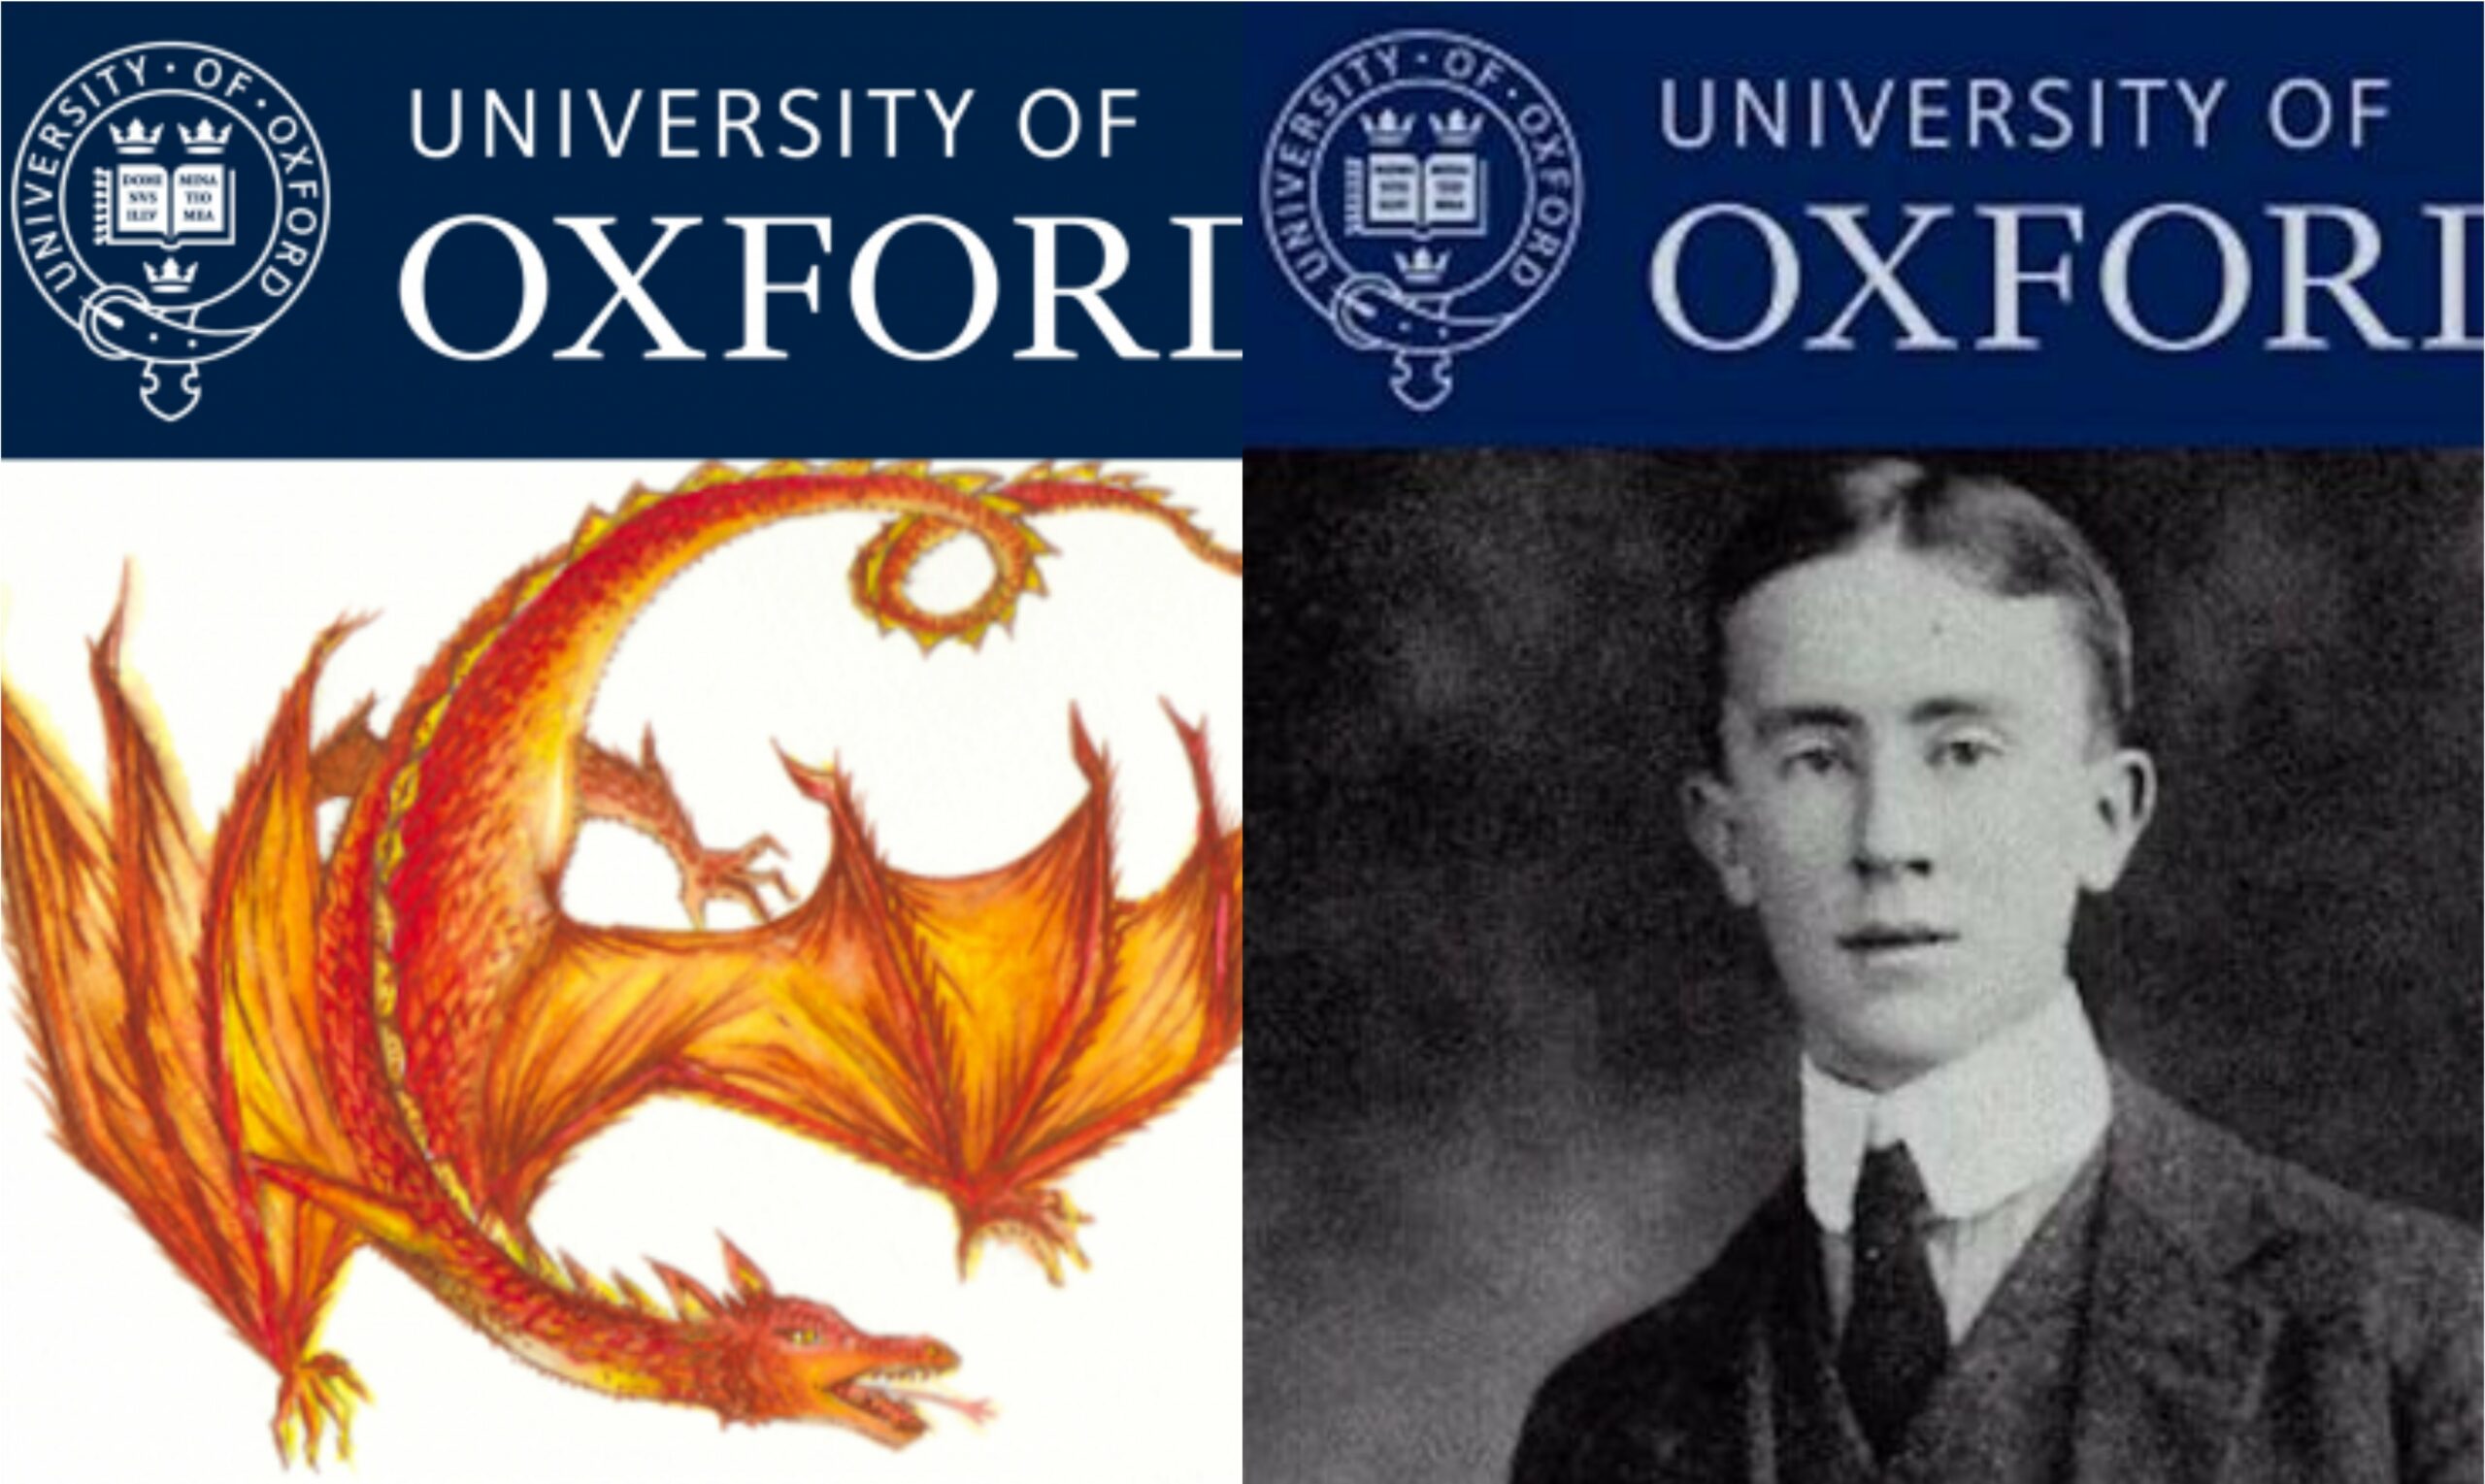 (c) University of Oxford - podcasts' series